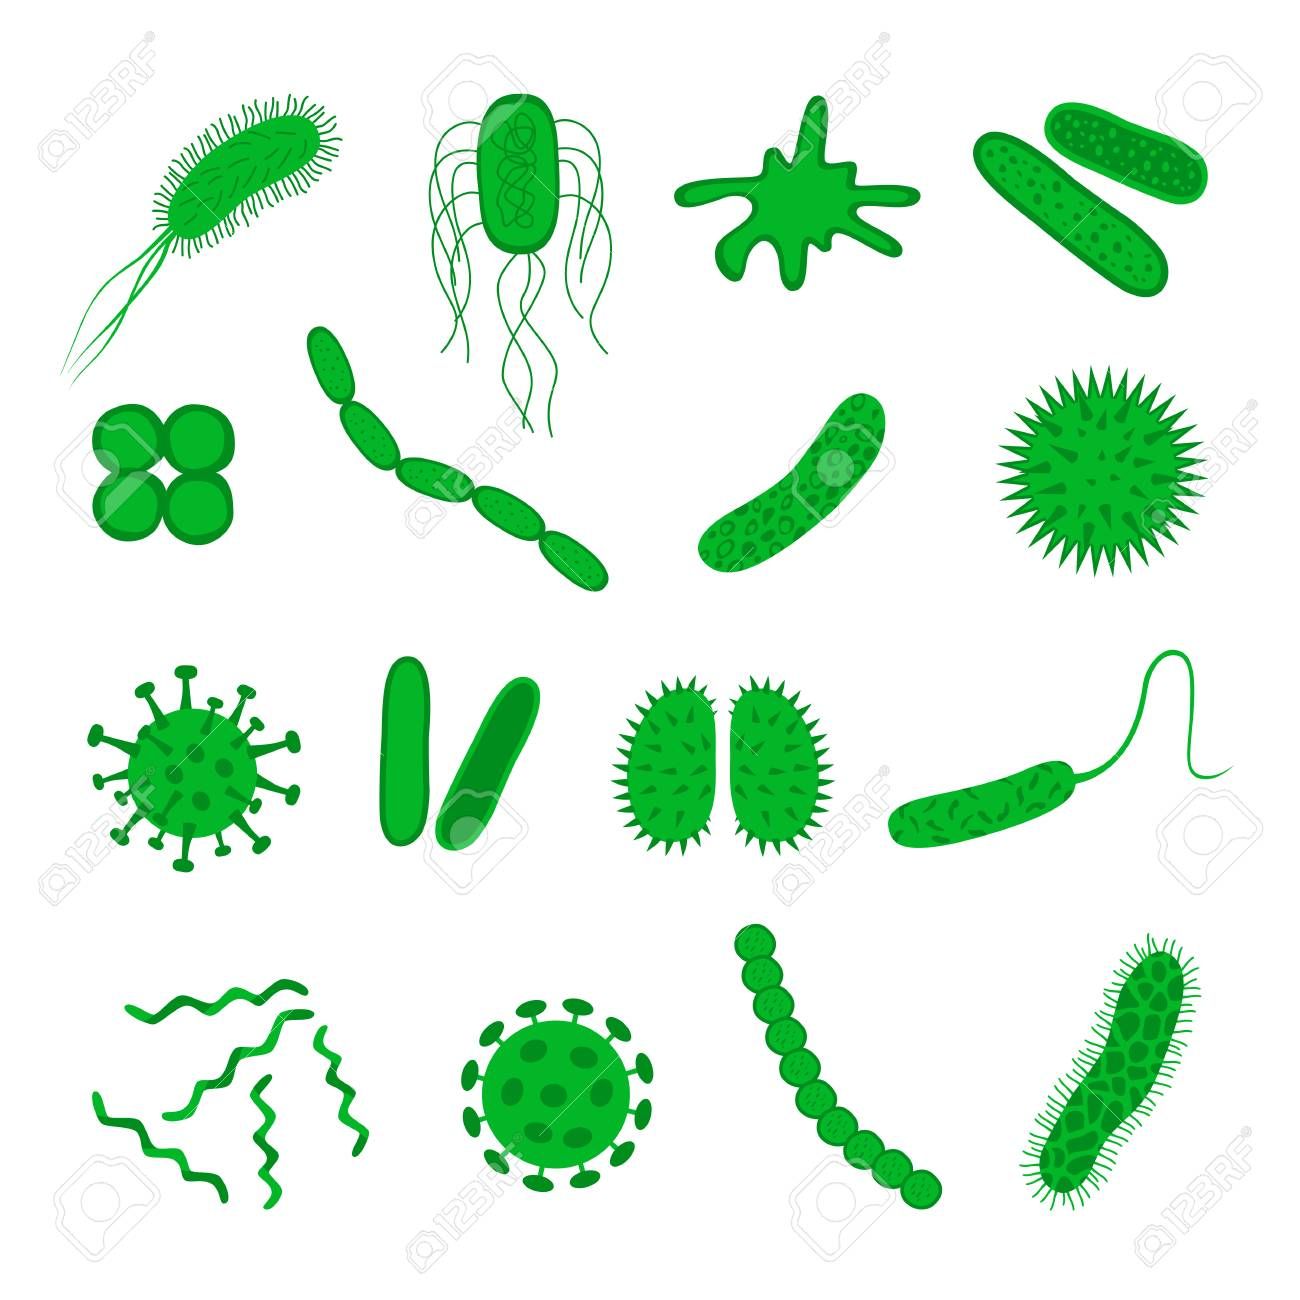 Free download Germs And Bacteria Icon Set Isolated On White